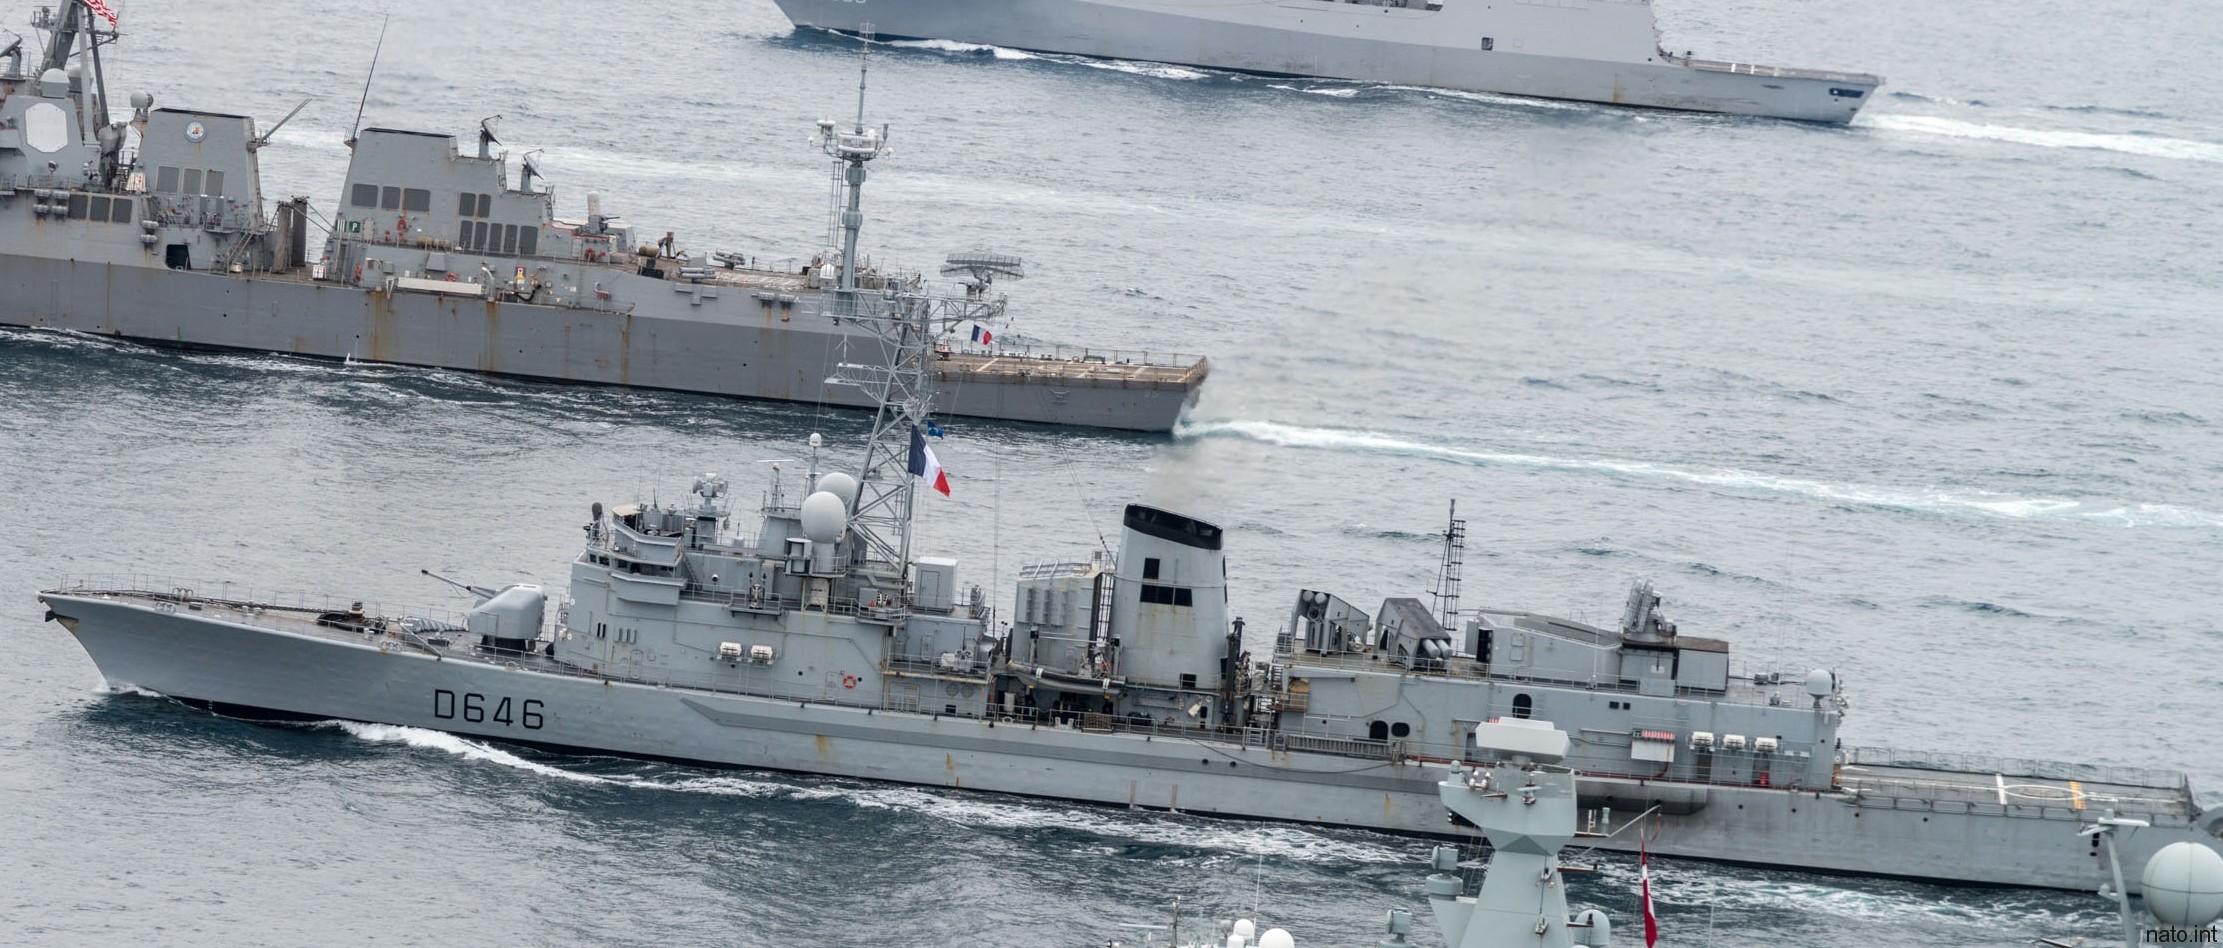 d-646 fs latouche treville f70as frigate destroyer asw french navy marine nationale 11a